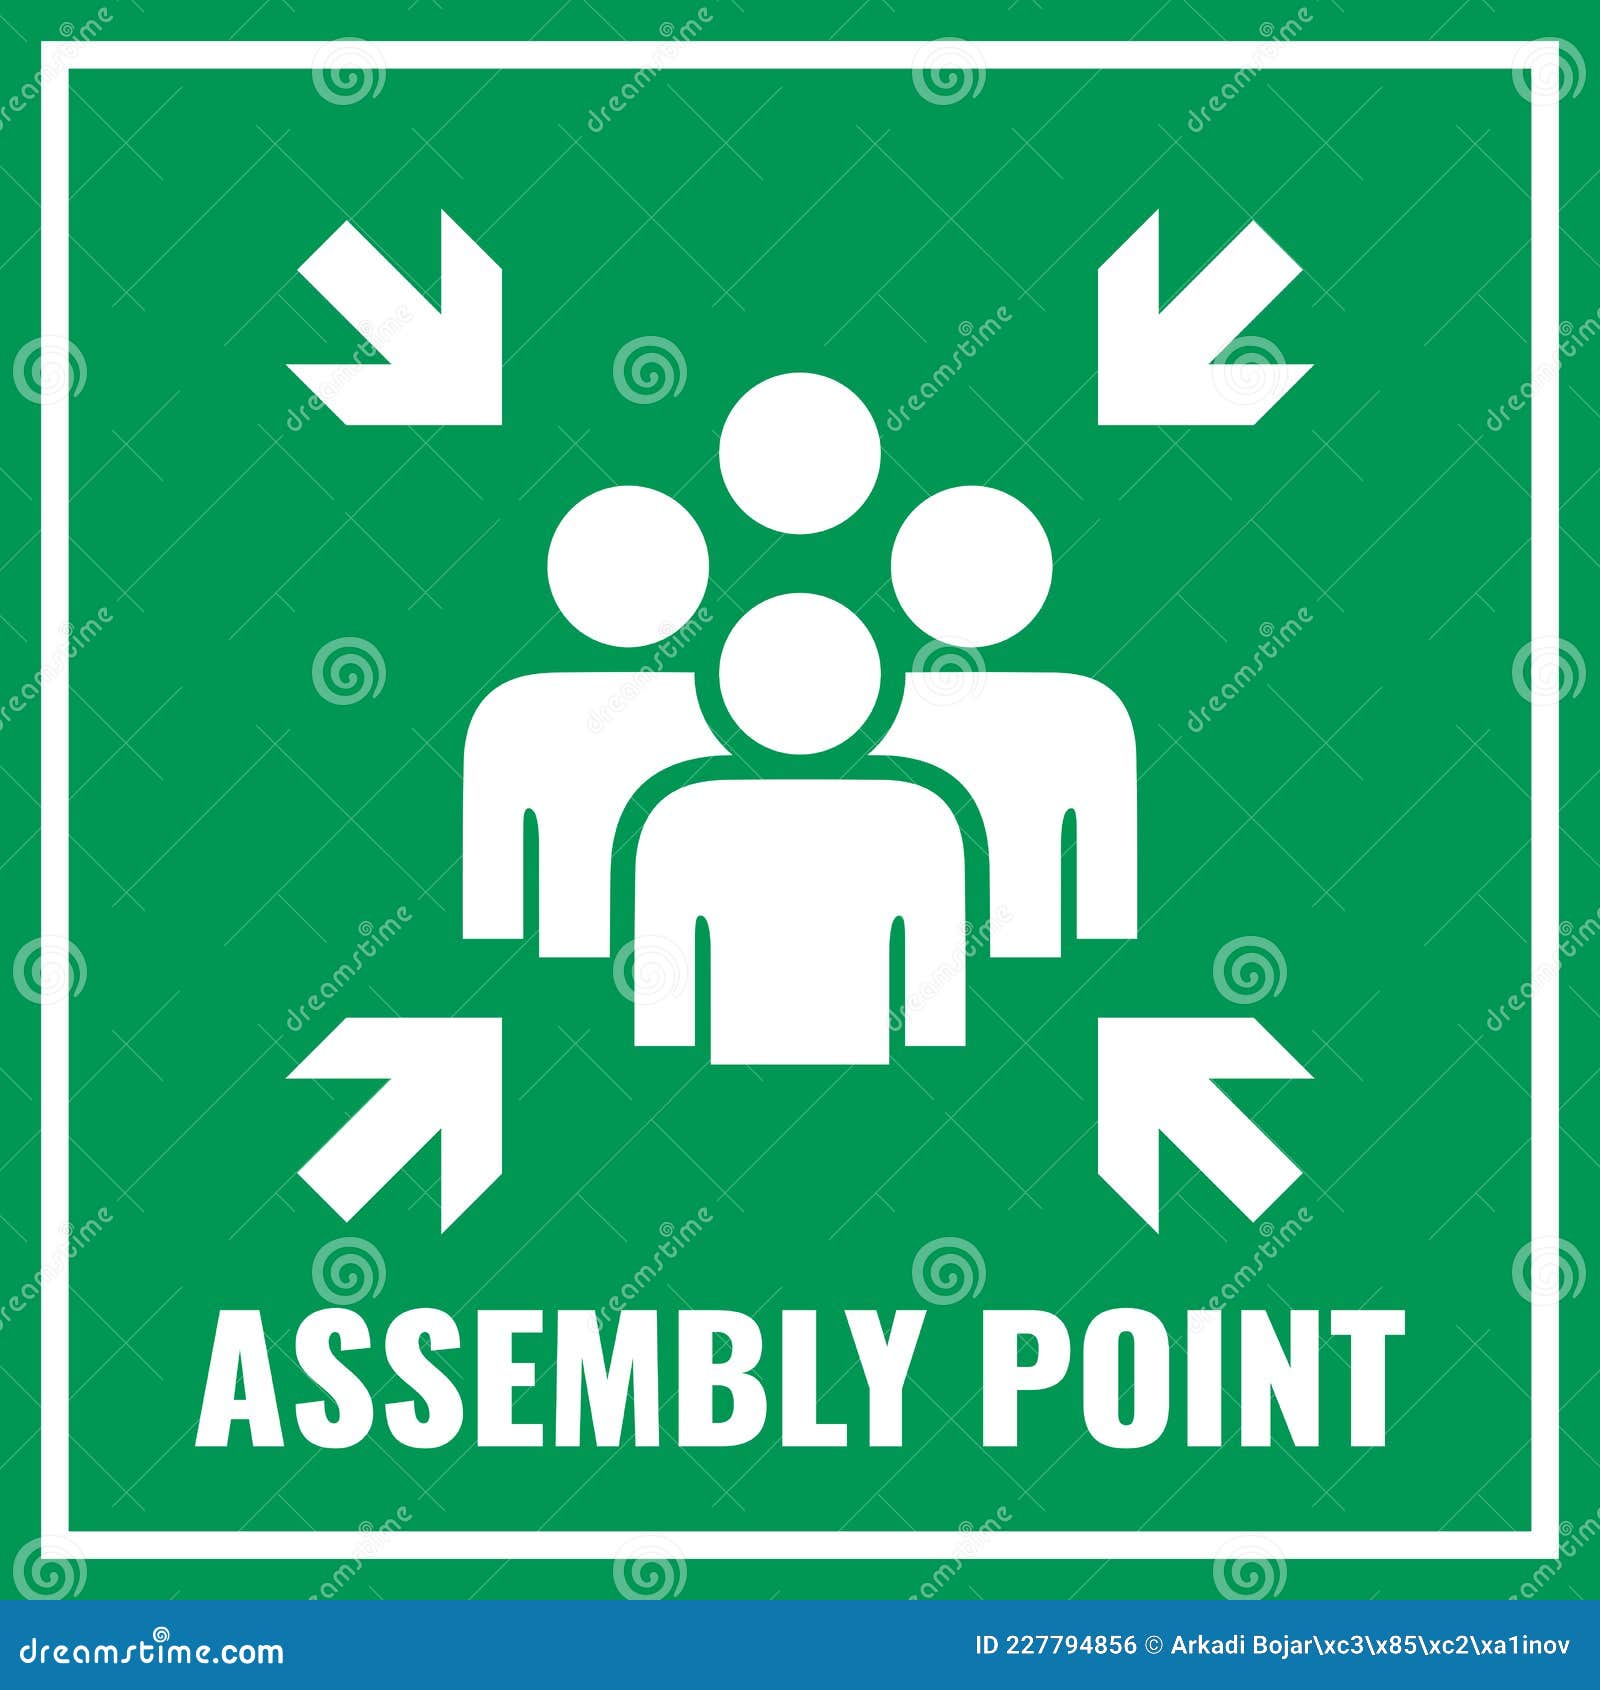 assembly point sign, fire evacuation